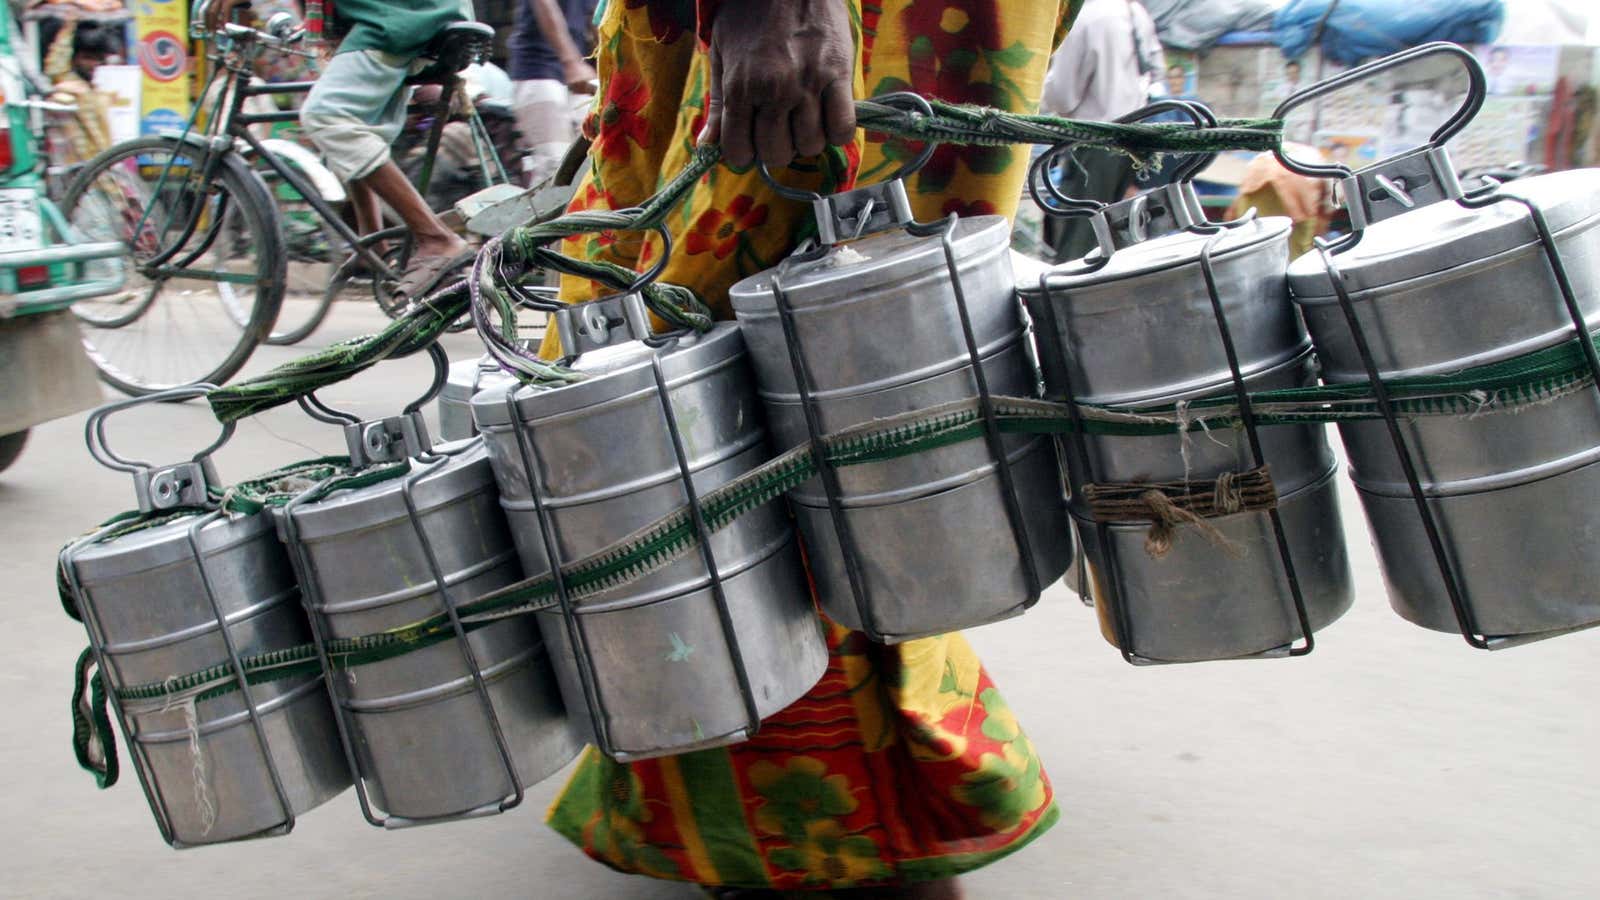 Tiffin lunch carriers, like the ones being carried through a street in Dhaka, are a perfect example of convenient, reusable design that predates disposable plastic by a longshot.